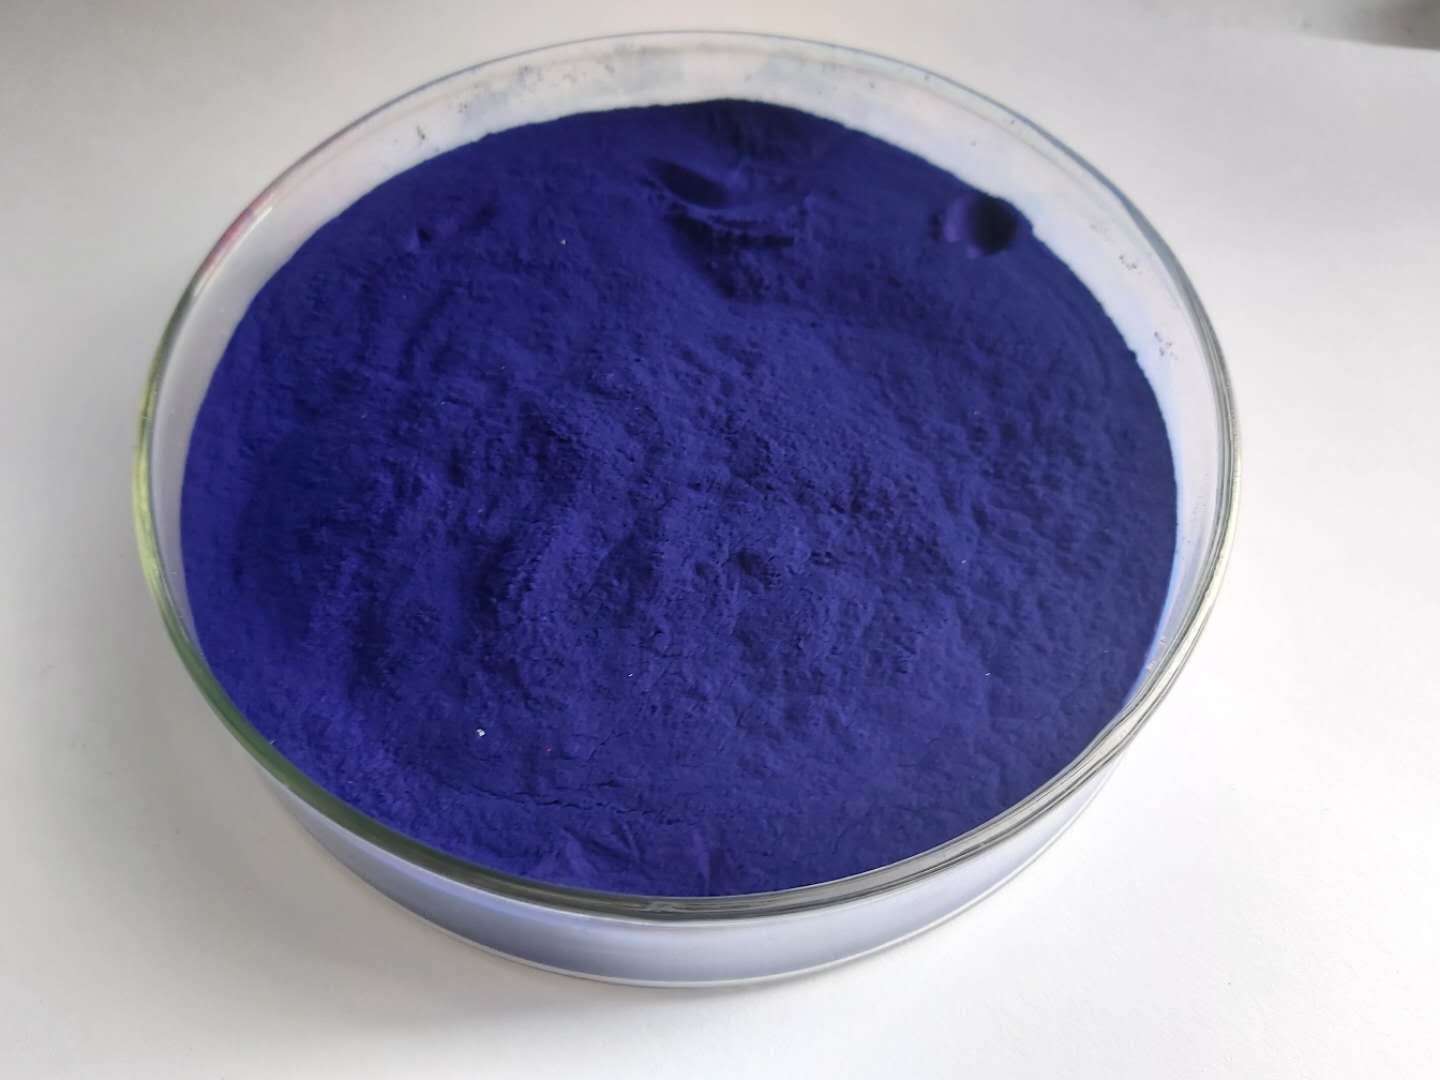 Pigment for Seeds Pigment Powder Blue B7 For SP/SL